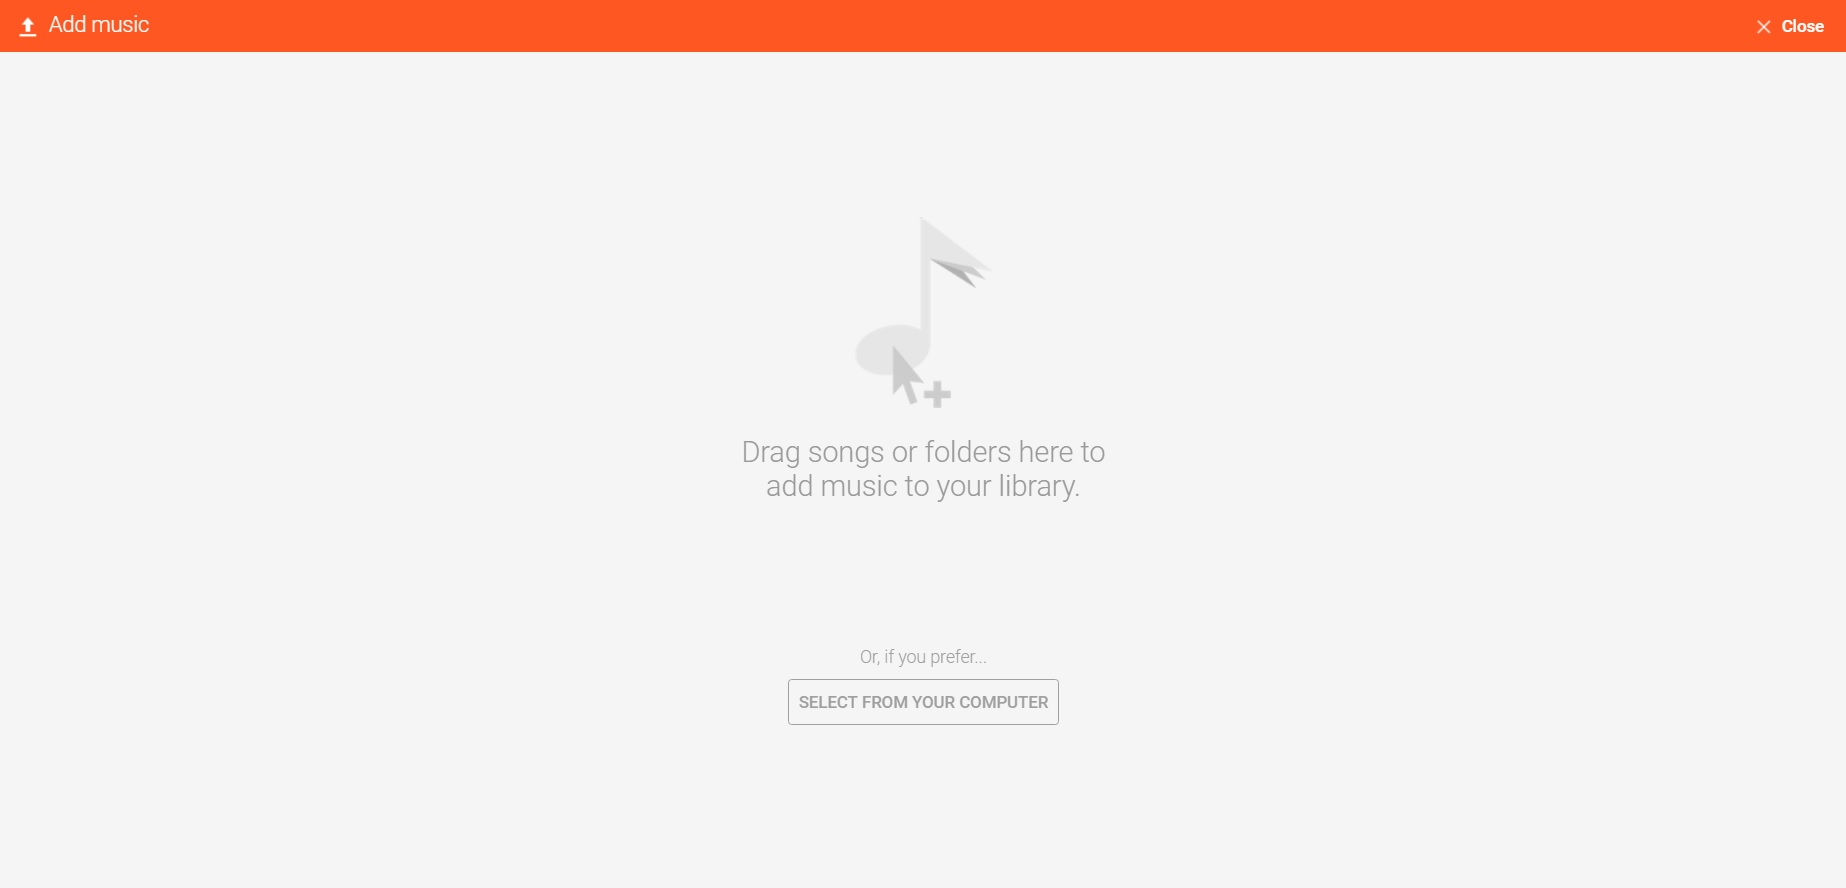 5 Google Play Music Tips And Tricks